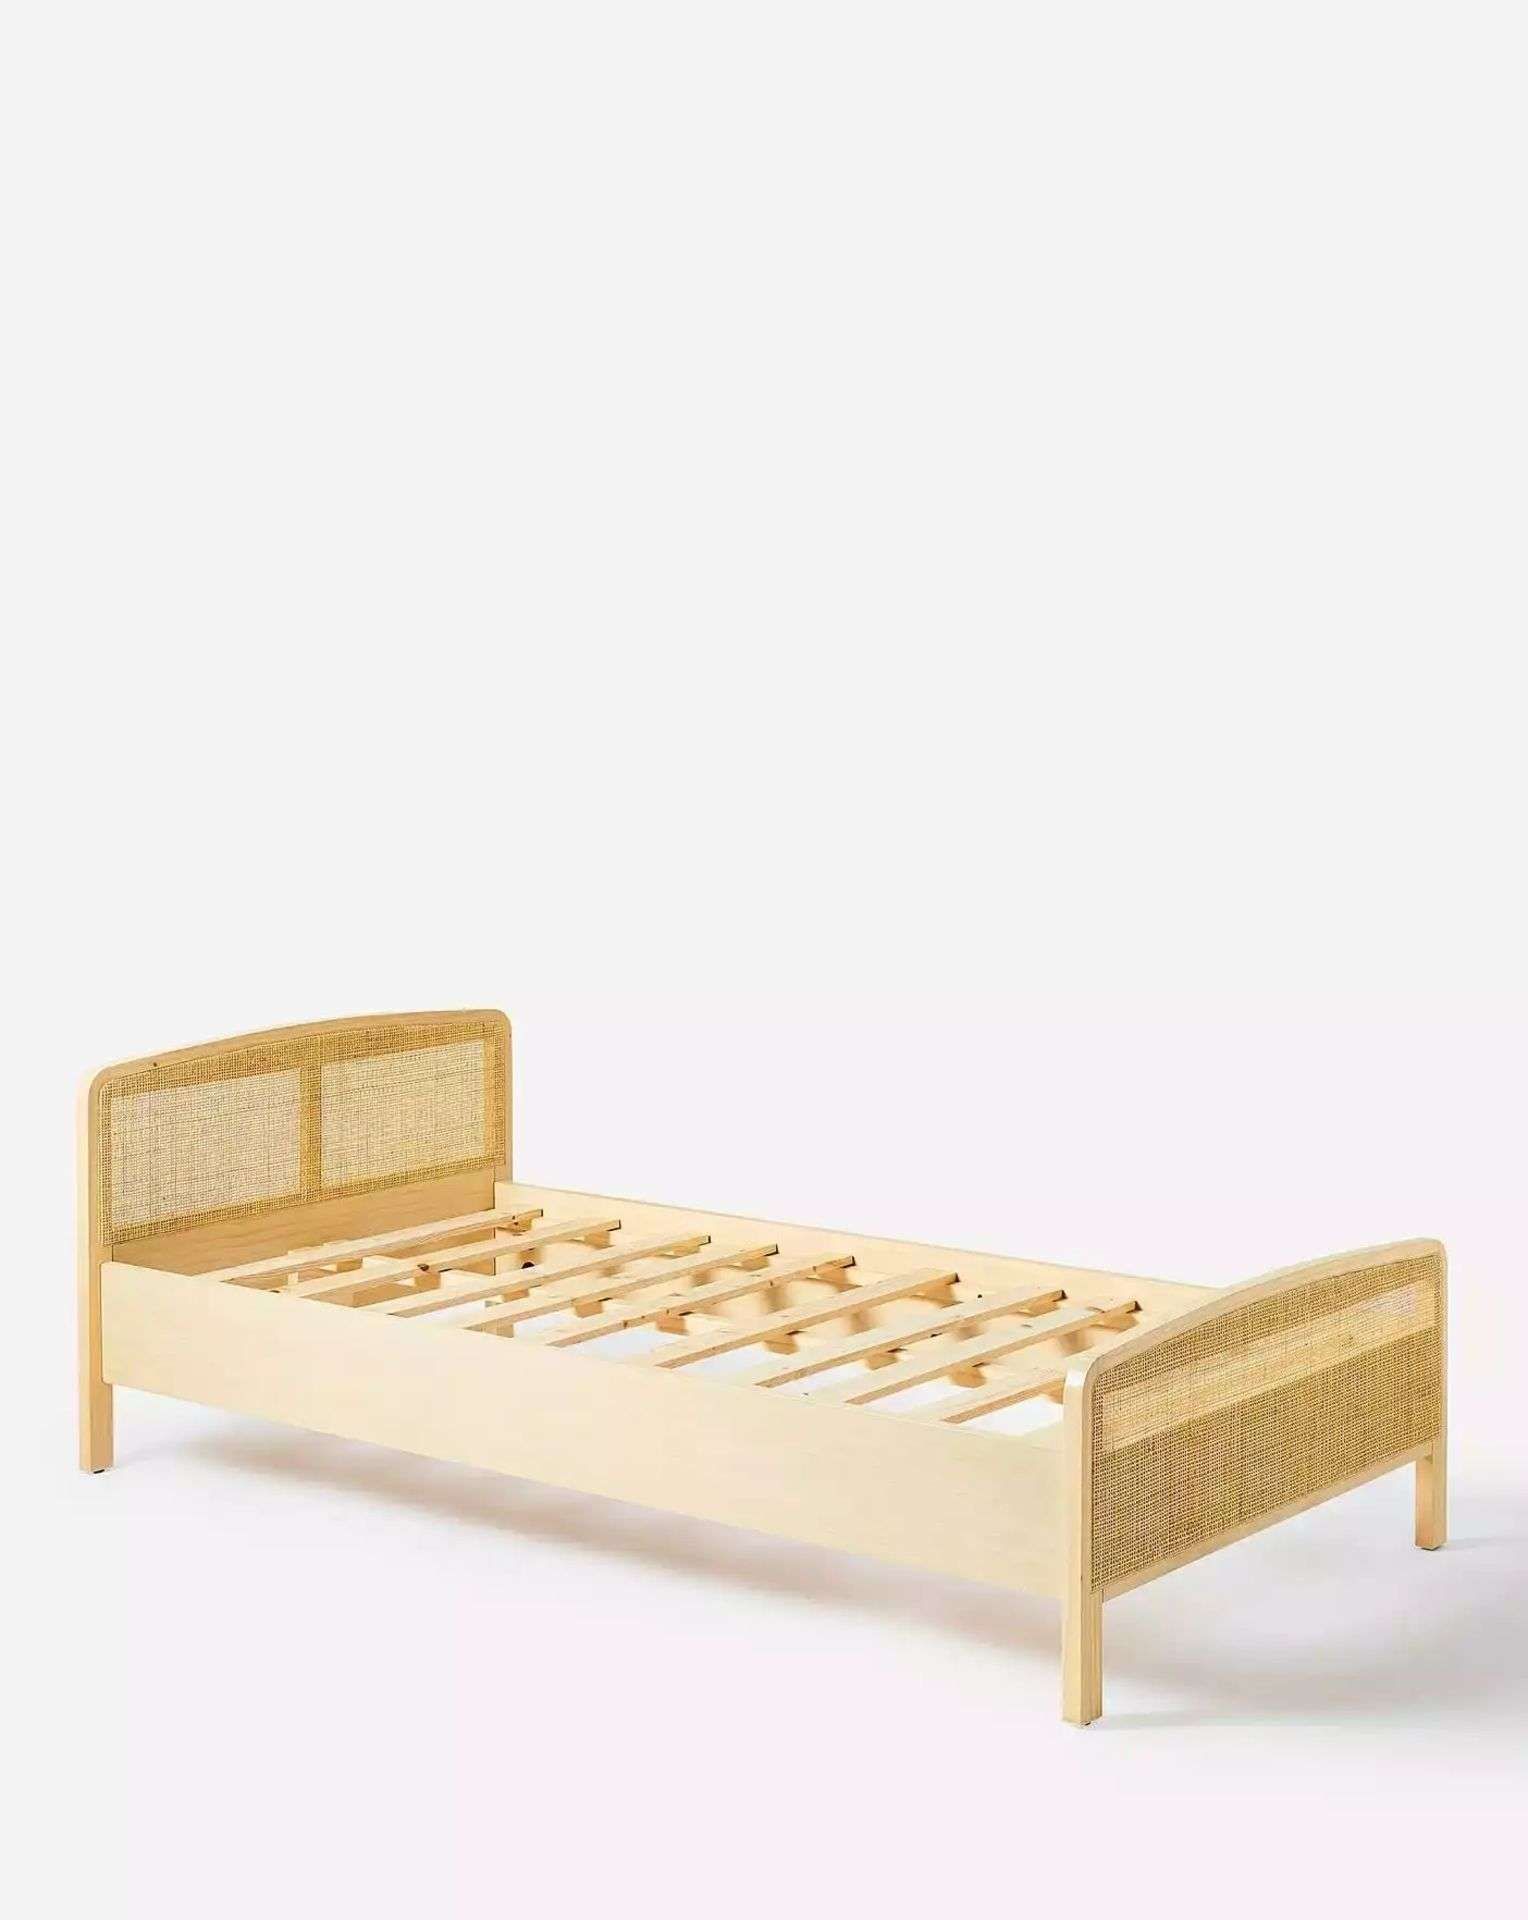 TRADE PALLET TO CONTAIN 4x BRAND NEW Noah Rattan Kids Bedframe. RRP £449 EACH. Beautifully made, our - Bild 2 aus 2